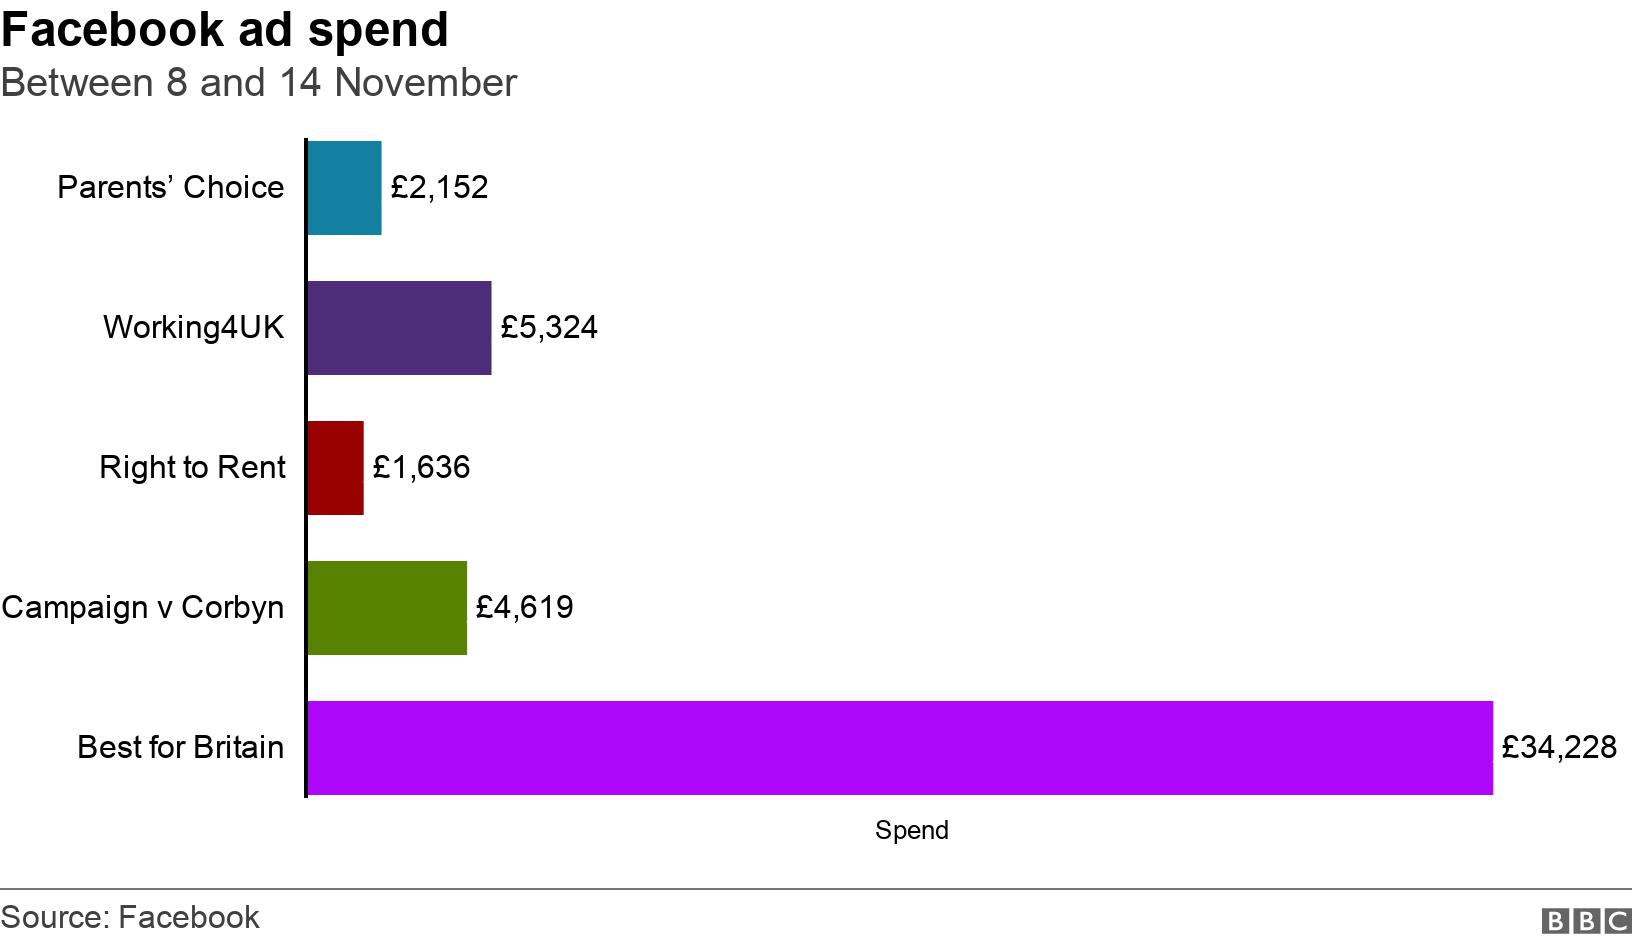 Facebook ad spend. Between 8 and 14 November. Facebook ad spend between 8 and 14 November
Parents' Choice £2,152
Working4UK £5,324
Campaign v Corbyn £4,619
Best for Britain £34,228 .